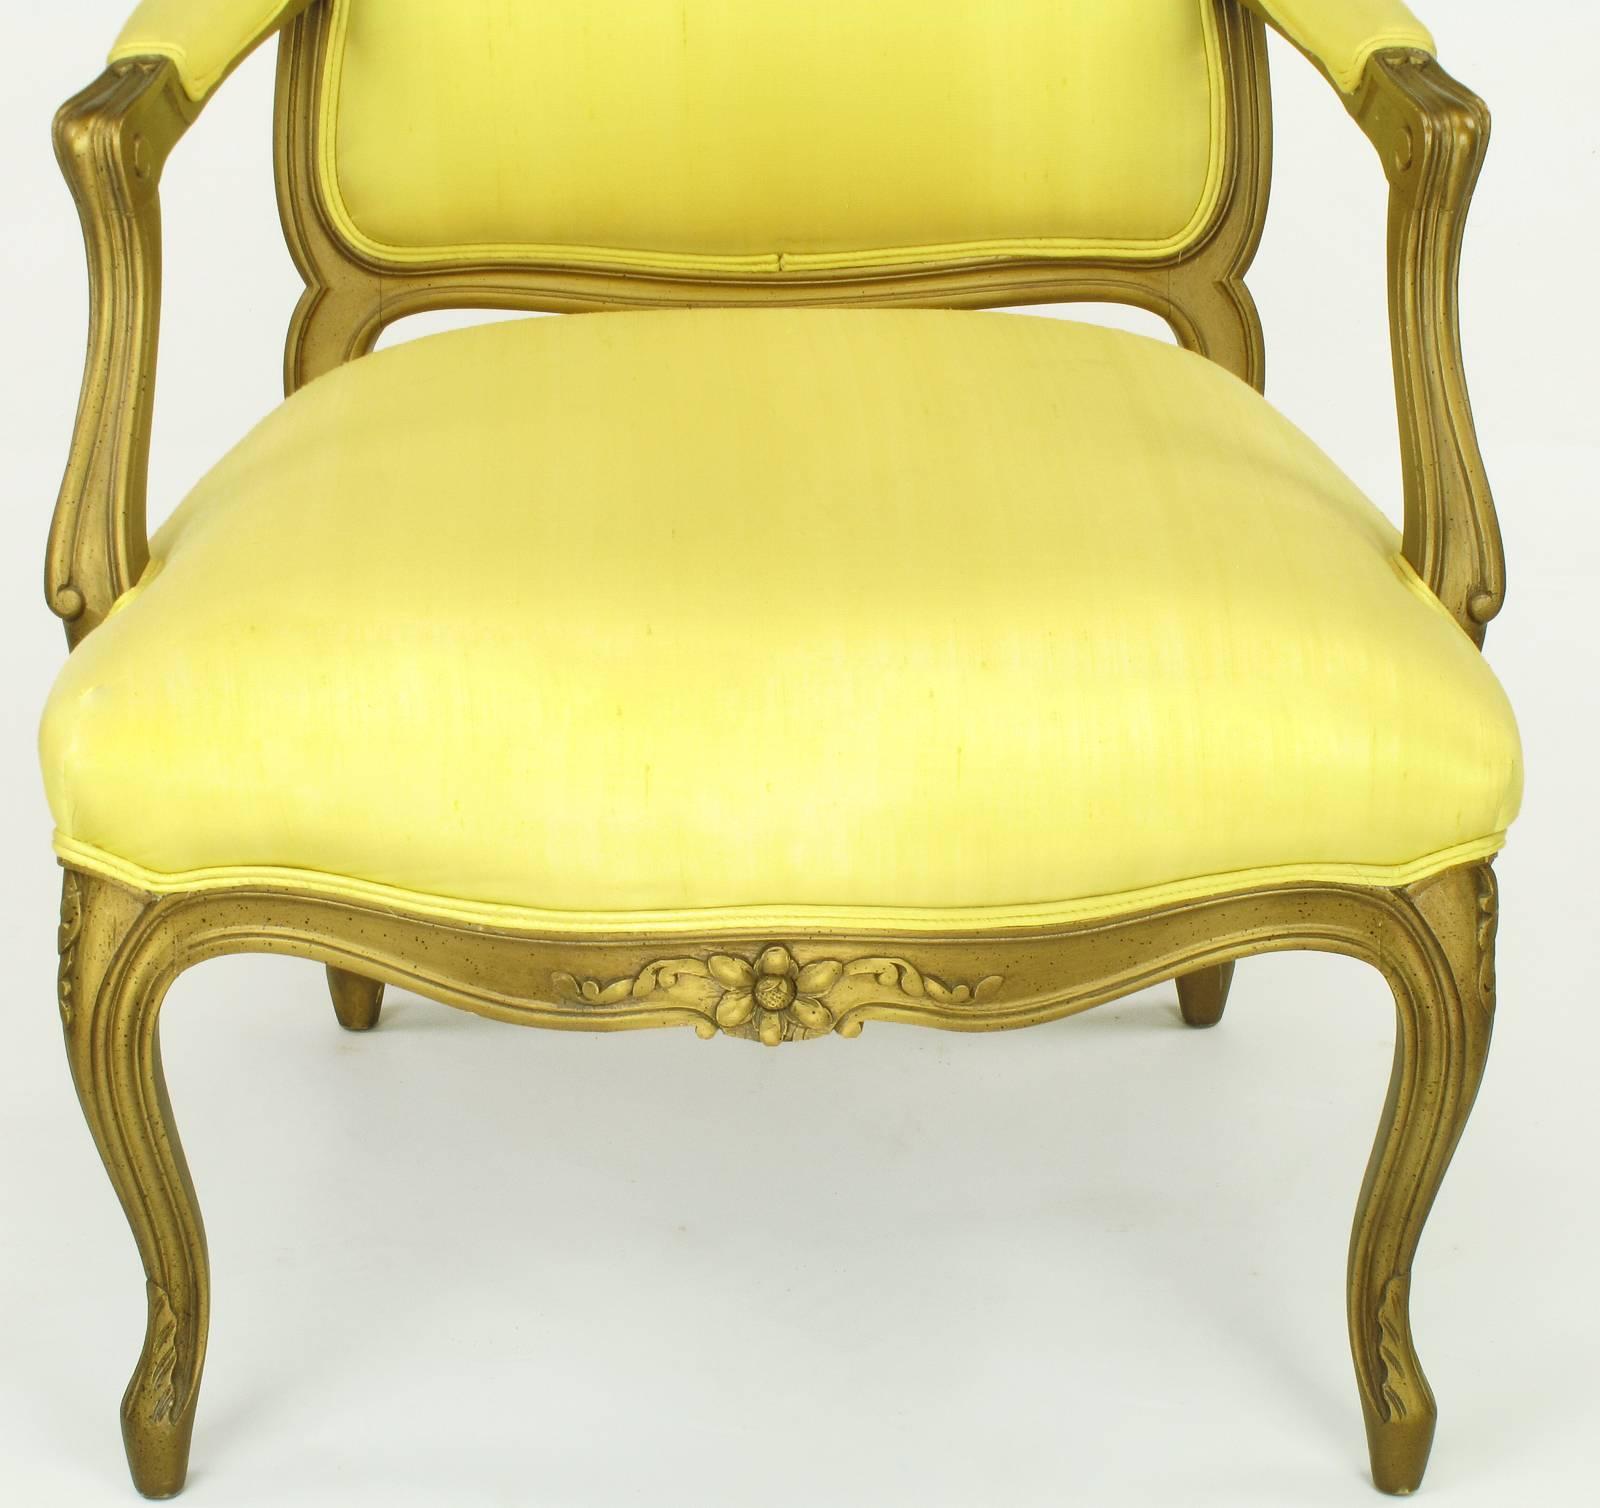 1940s Giltwood Louis XV Style Fauteuil with Saffron Silk Upholstery 2